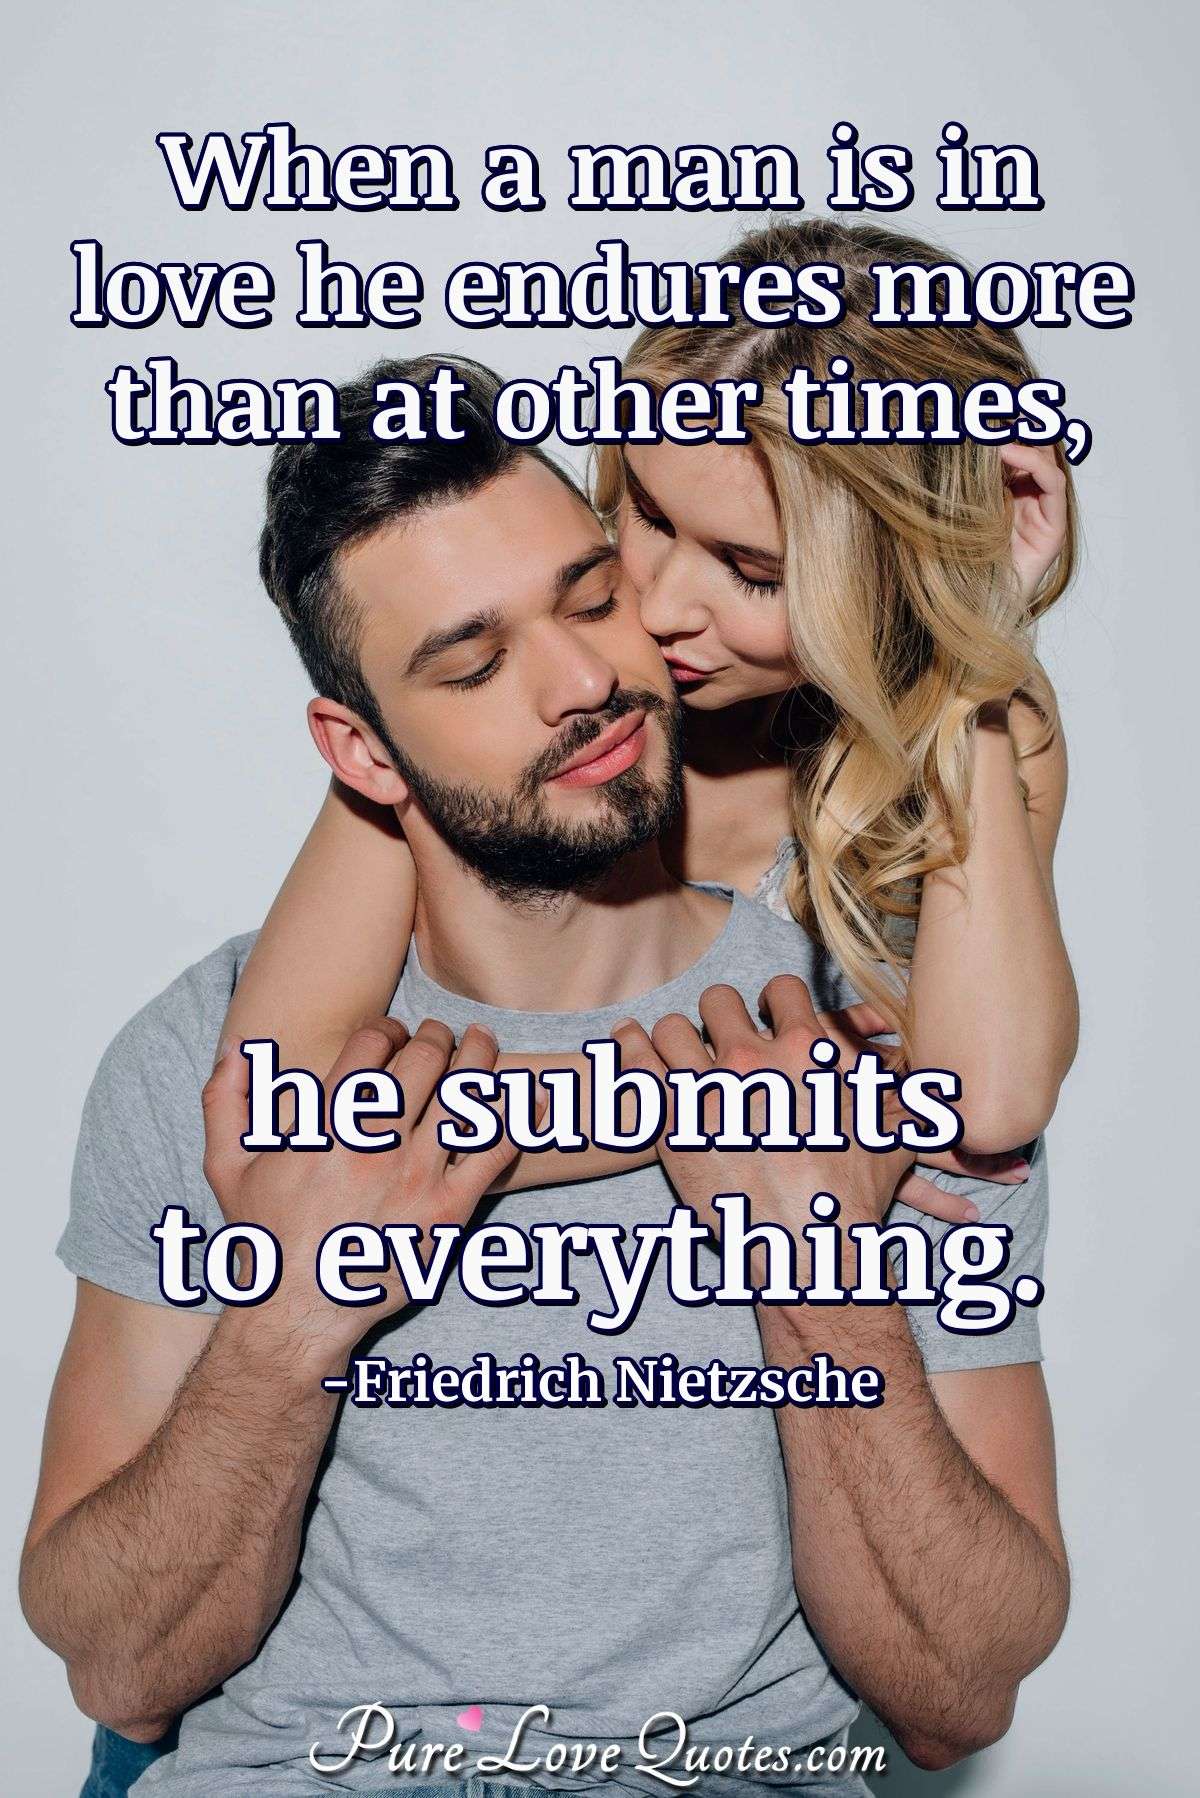 When a man is in love he endures more than at other times, he submits to everything. - Friedrich Nietzsche